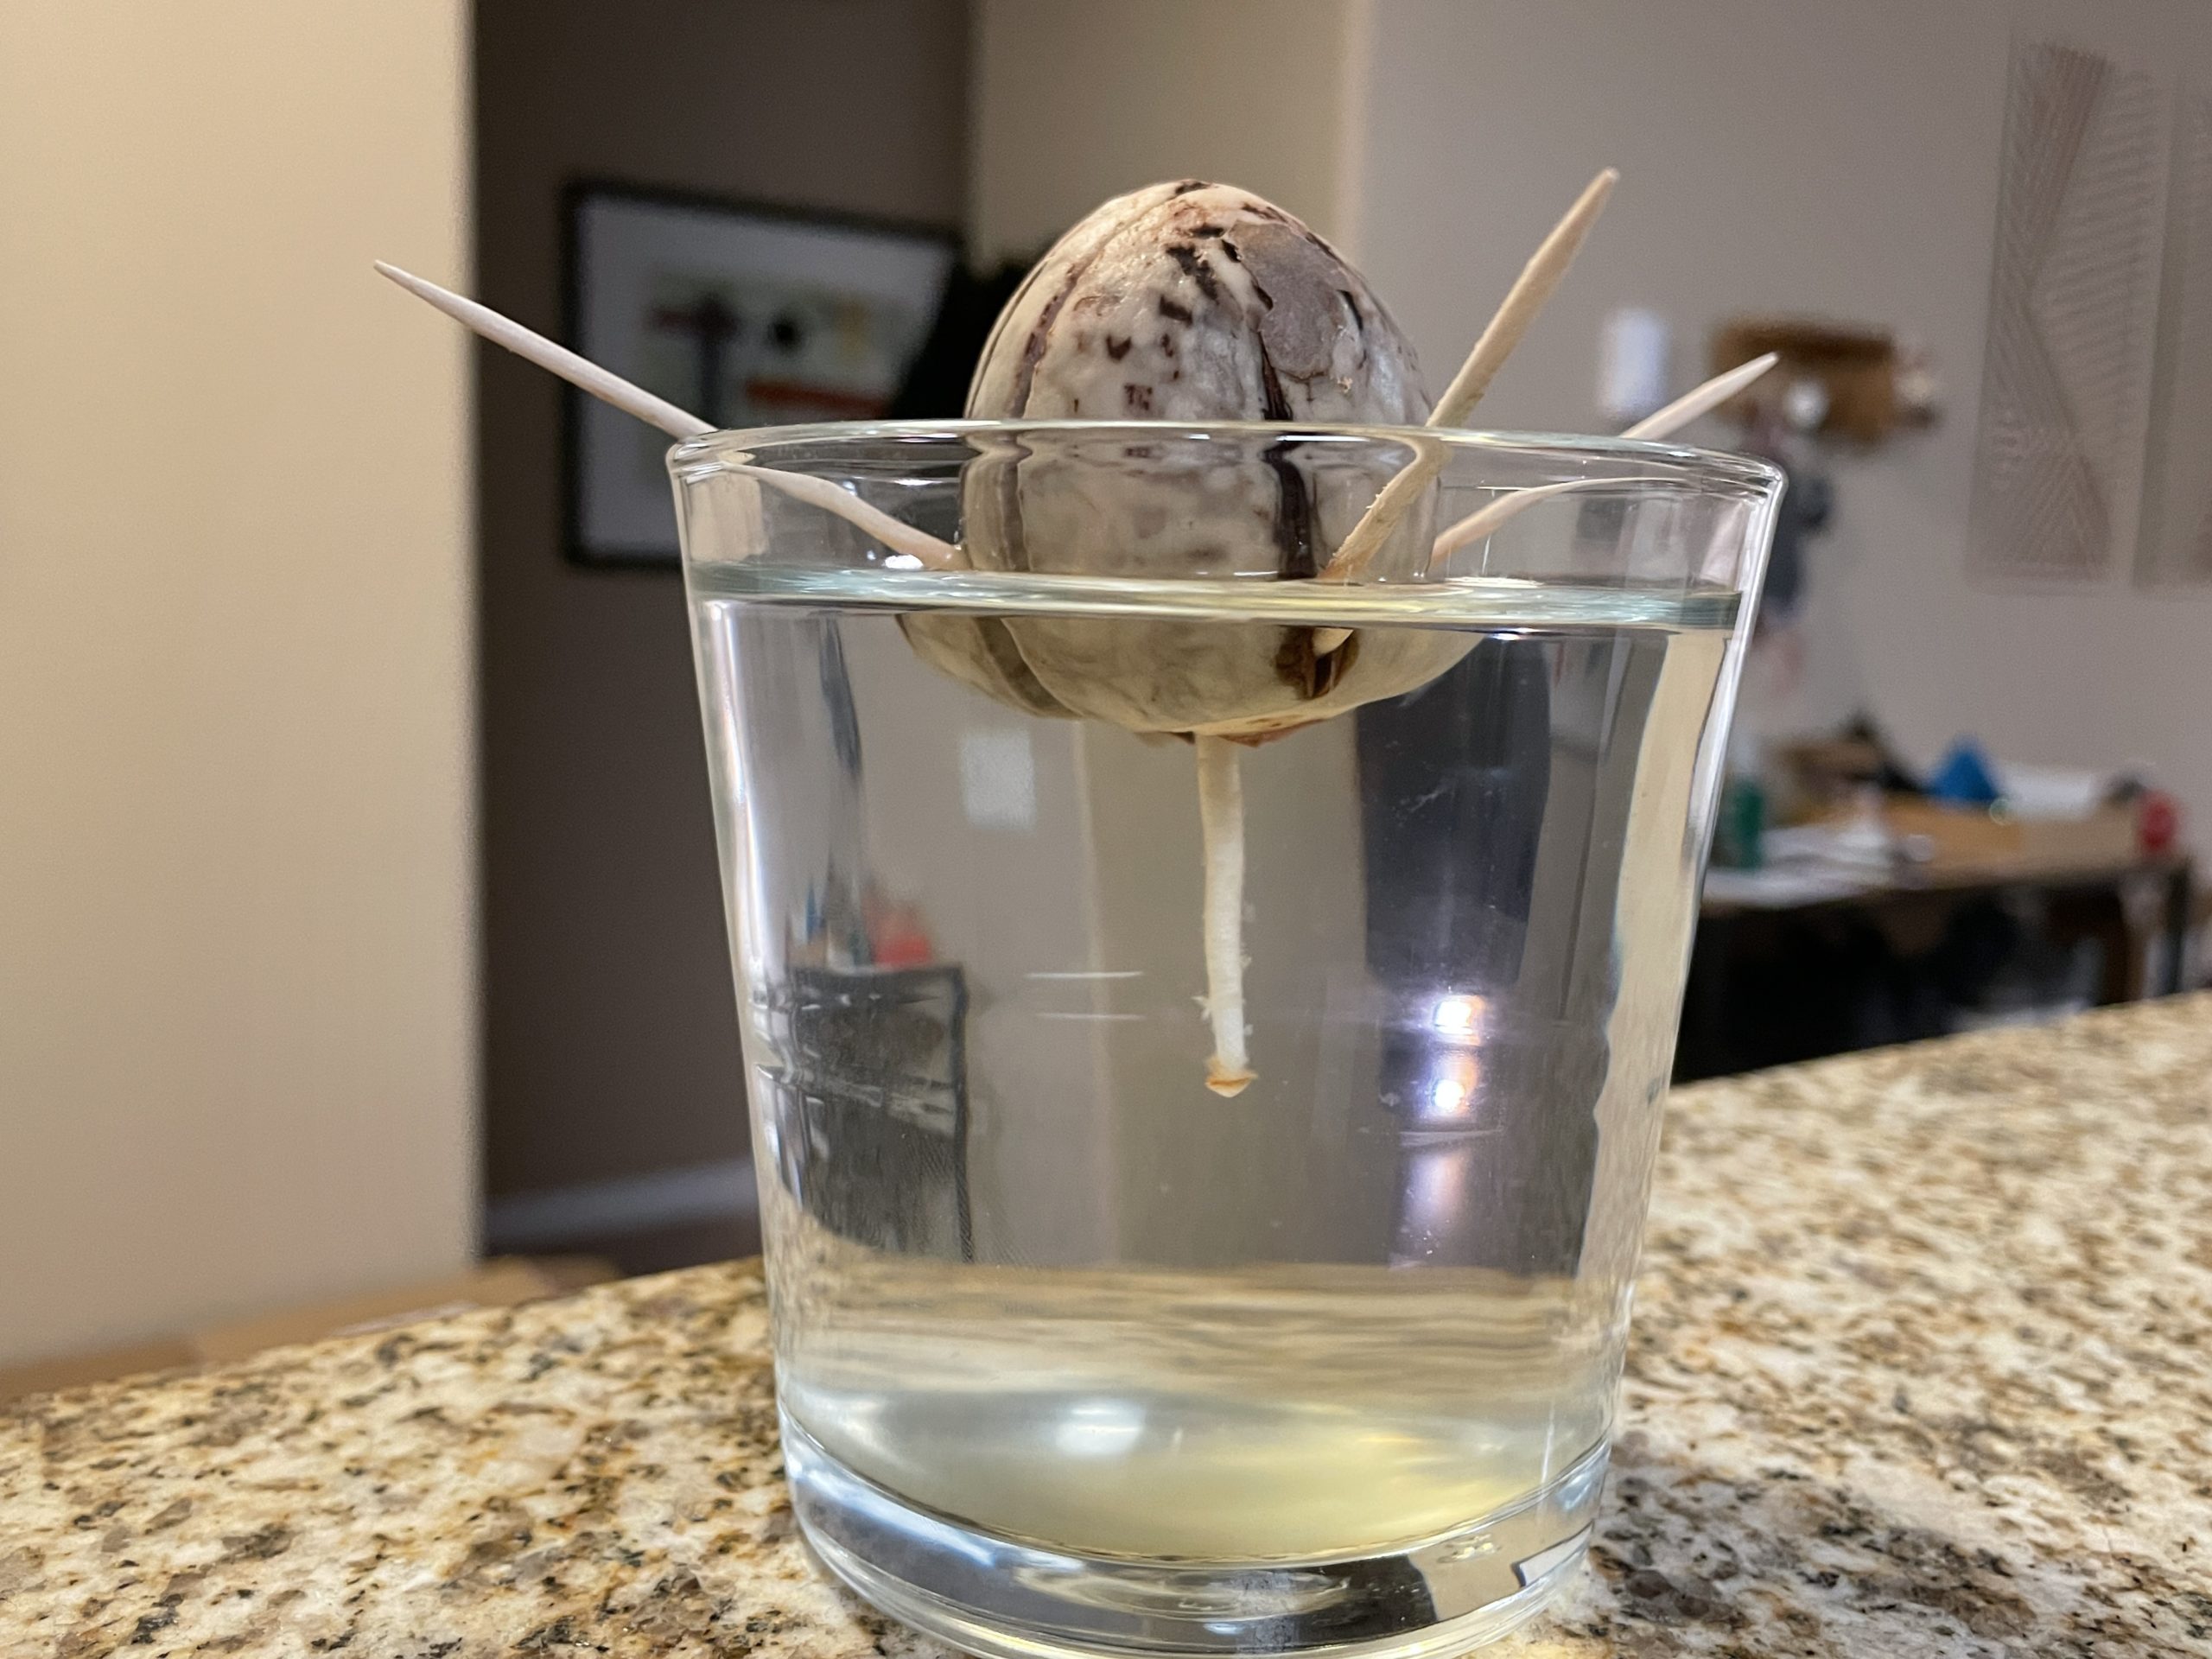 avocado pit held up by toothpicks in a small glass of water. a small white root is starting to grow from the bottom of the pit.